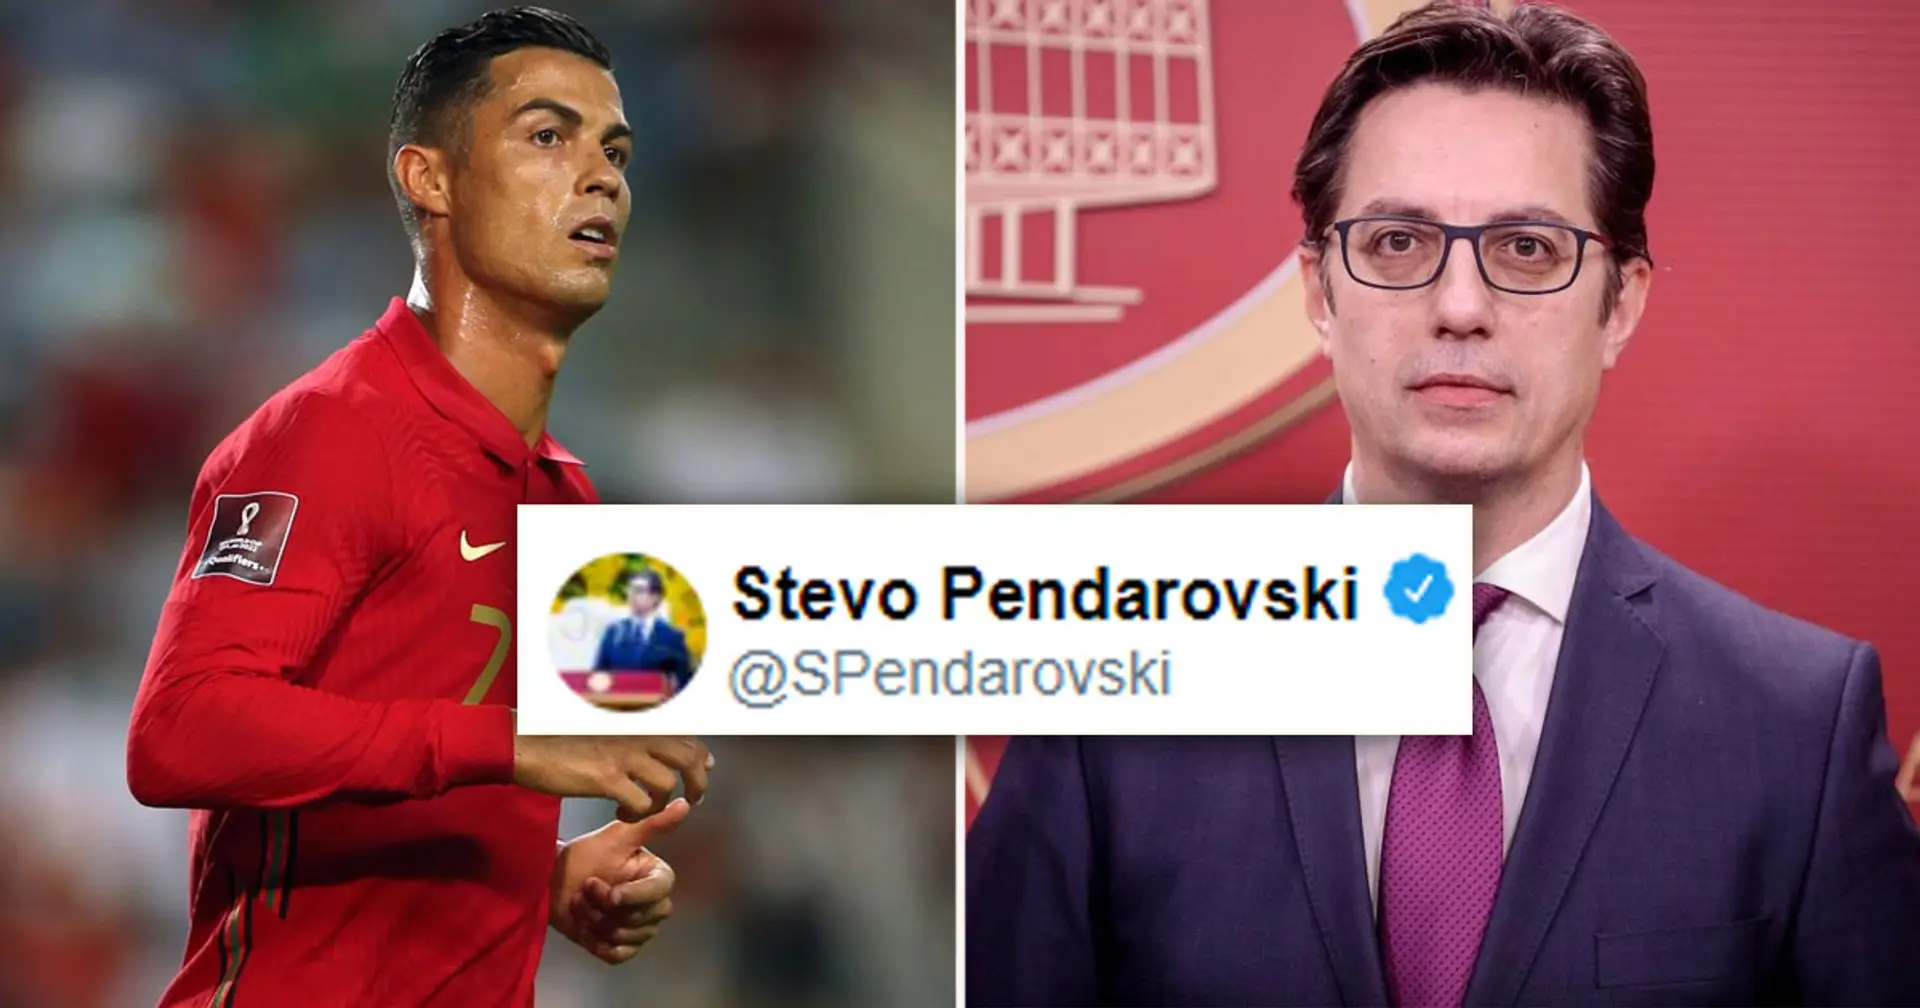 'Get ready, you are next': North Macedonia president sends warning to Ronaldo before World Cup playoff final